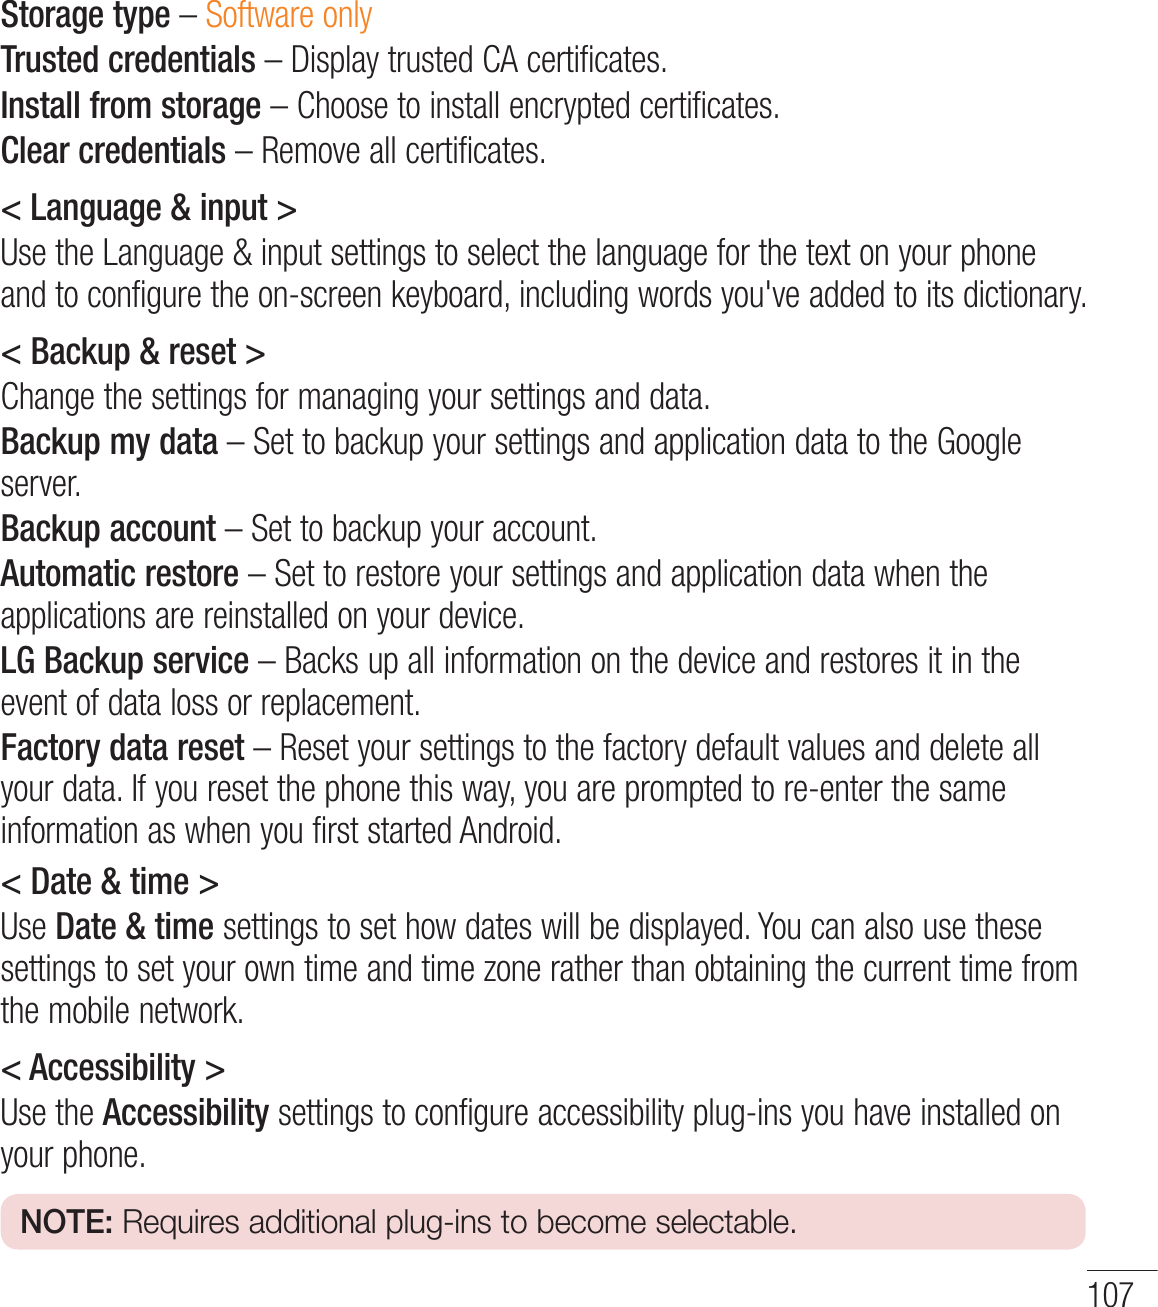 107Storage type – Software onlyTrusted credentials – Display trusted CA certificates.Install from storage – Choose to install encrypted certificates.Clear credentials – Remove all certificates.&lt; Language &amp; input &gt;Use the Language &amp; input settings to select the language for the text on your phone and to configure the on-screen keyboard, including words you&apos;ve added to its dictionary.&lt; Backup &amp; reset &gt;Change the settings for managing your settings and data.Backup my data – Set to backup your settings and application data to the Google server.Backup account – Set to backup your account.Automatic restore – Set to restore your settings and application data when the applications are reinstalled on your device.LG Backup service – Backs up all information on the device and restores it in the event of data loss or replacement.Factory data reset – Reset your settings to the factory default values and delete all your data. If you reset the phone this way, you are prompted to re-enter the same information as when you first started Android.&lt; Date &amp; time &gt;Use Date &amp; time settings to set how dates will be displayed. You can also use these settings to set your own time and time zone rather than obtaining the current time from the mobile network.&lt; Accessibility &gt;Use the Accessibility settings to configure accessibility plug-ins you have installed on your phone.NOTE: Requires additional plug-ins to become selectable.